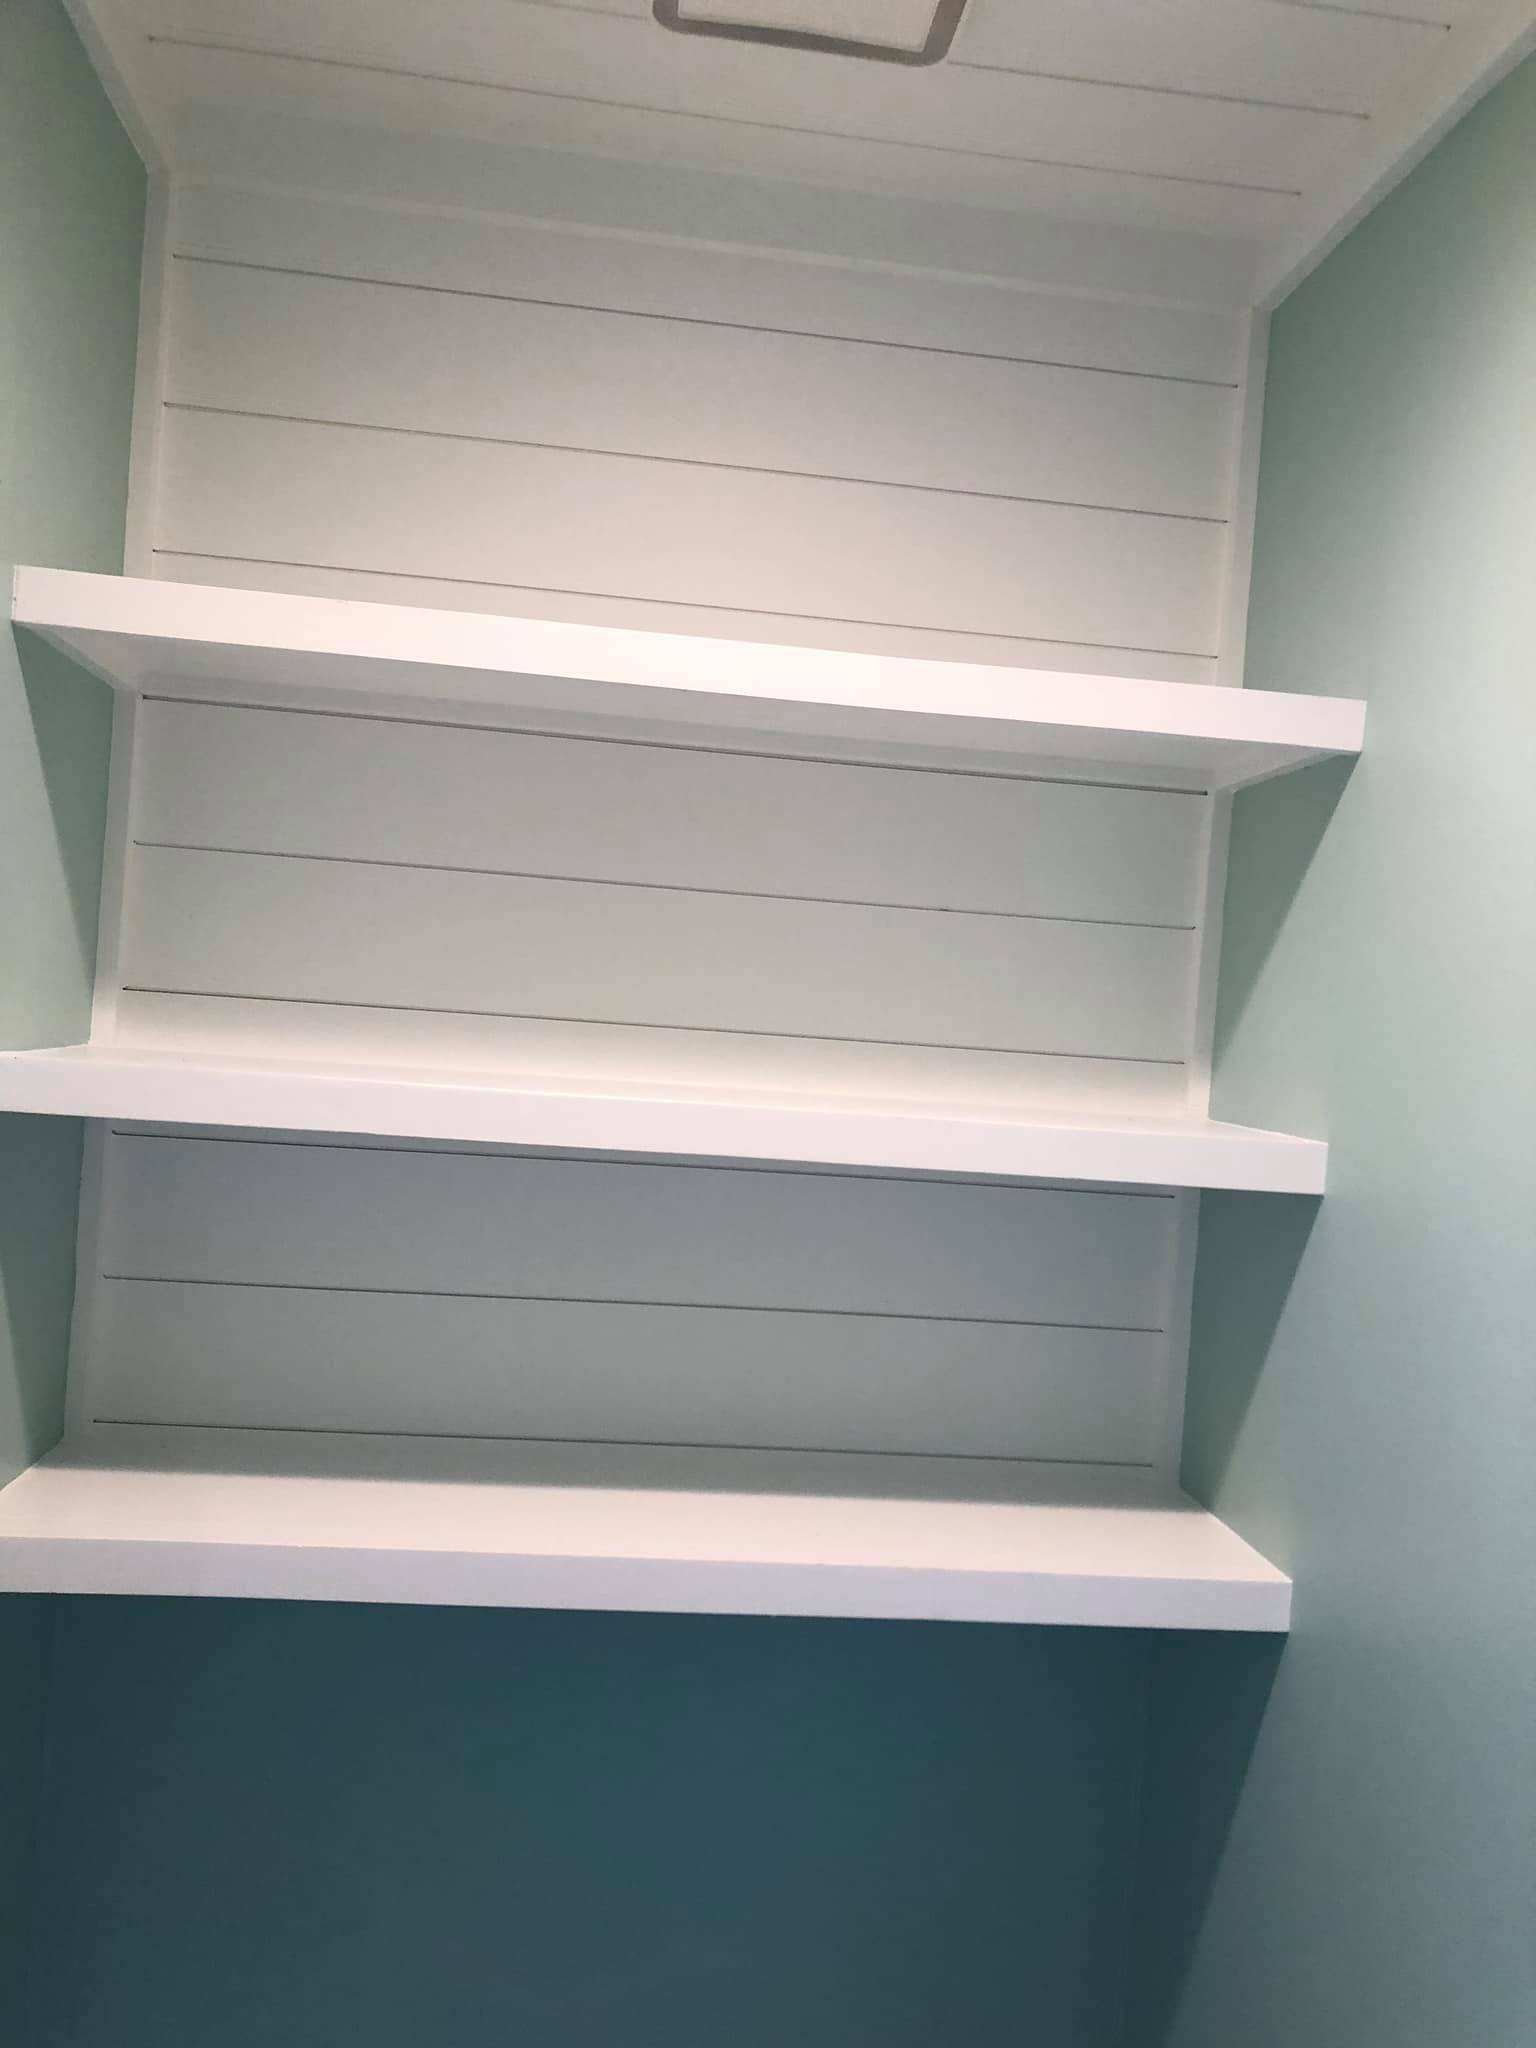 Tongue and Groove with Shiplap on Walls and Ceiling Floating Shelves